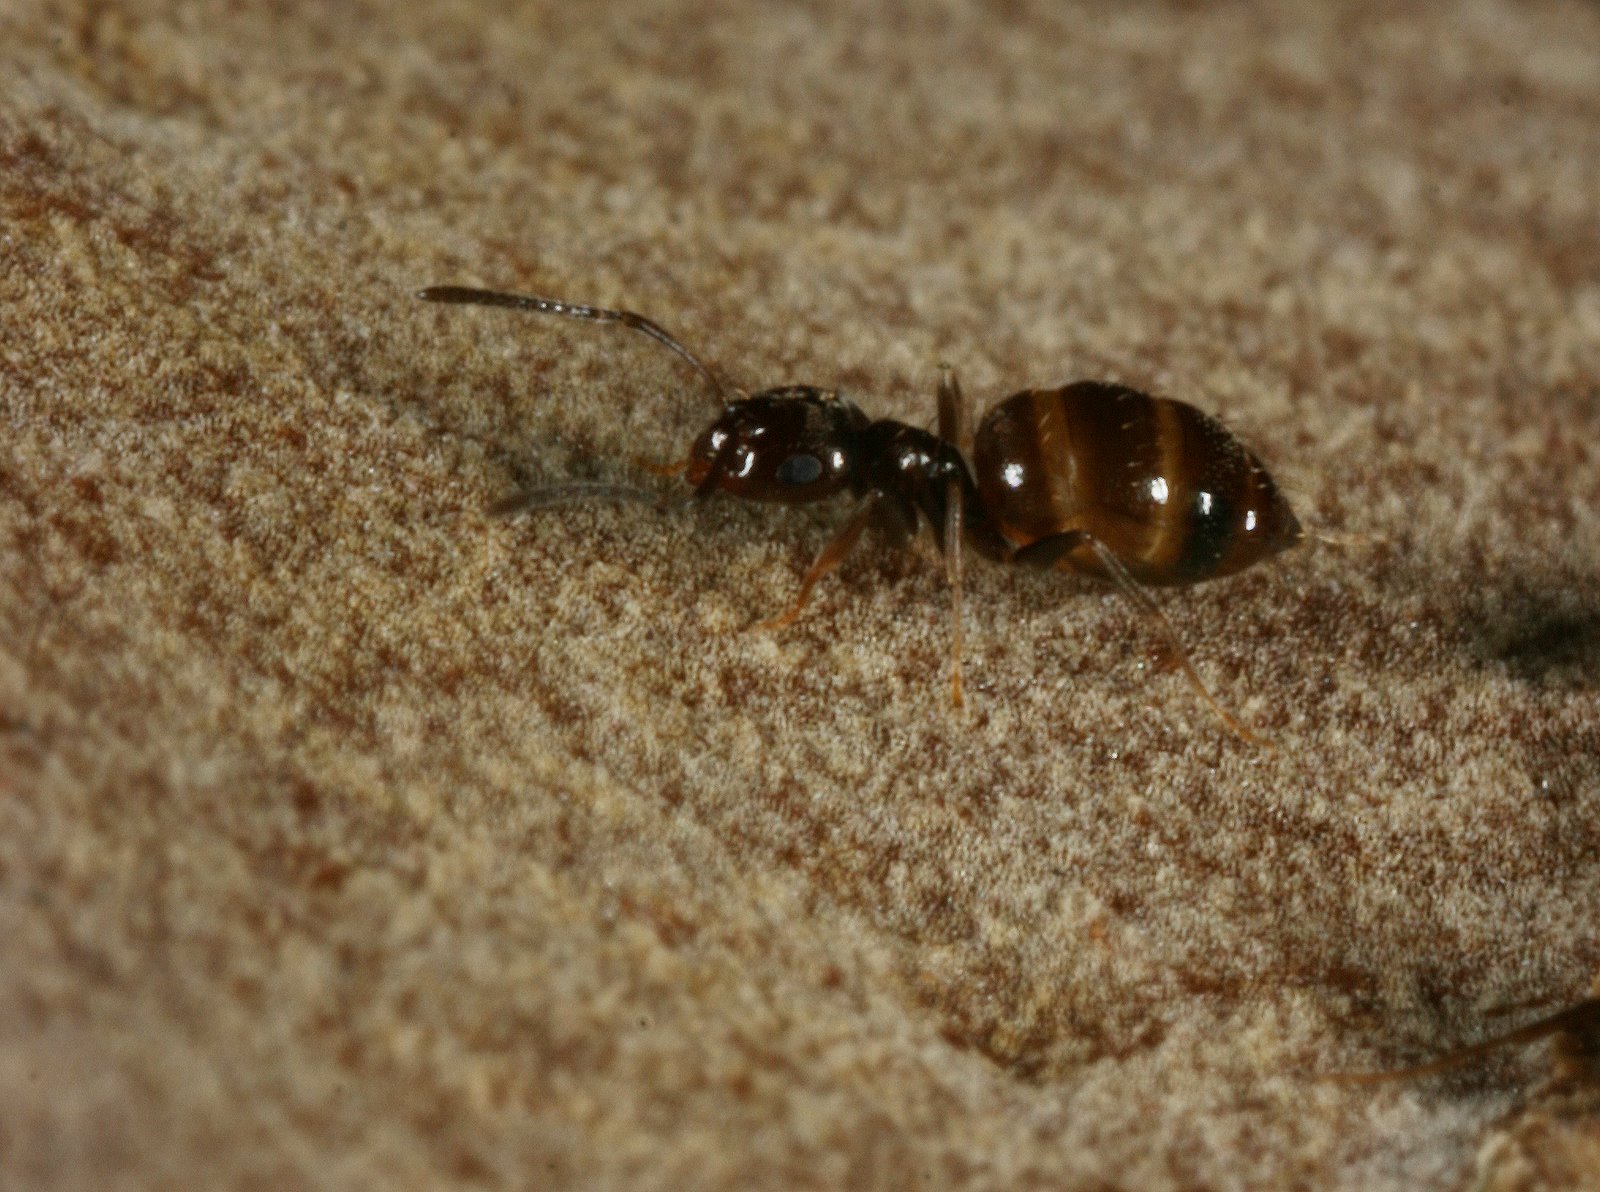 small rover ants in the genus Brachymyrmex have become a growing pest in Texas over the past four years